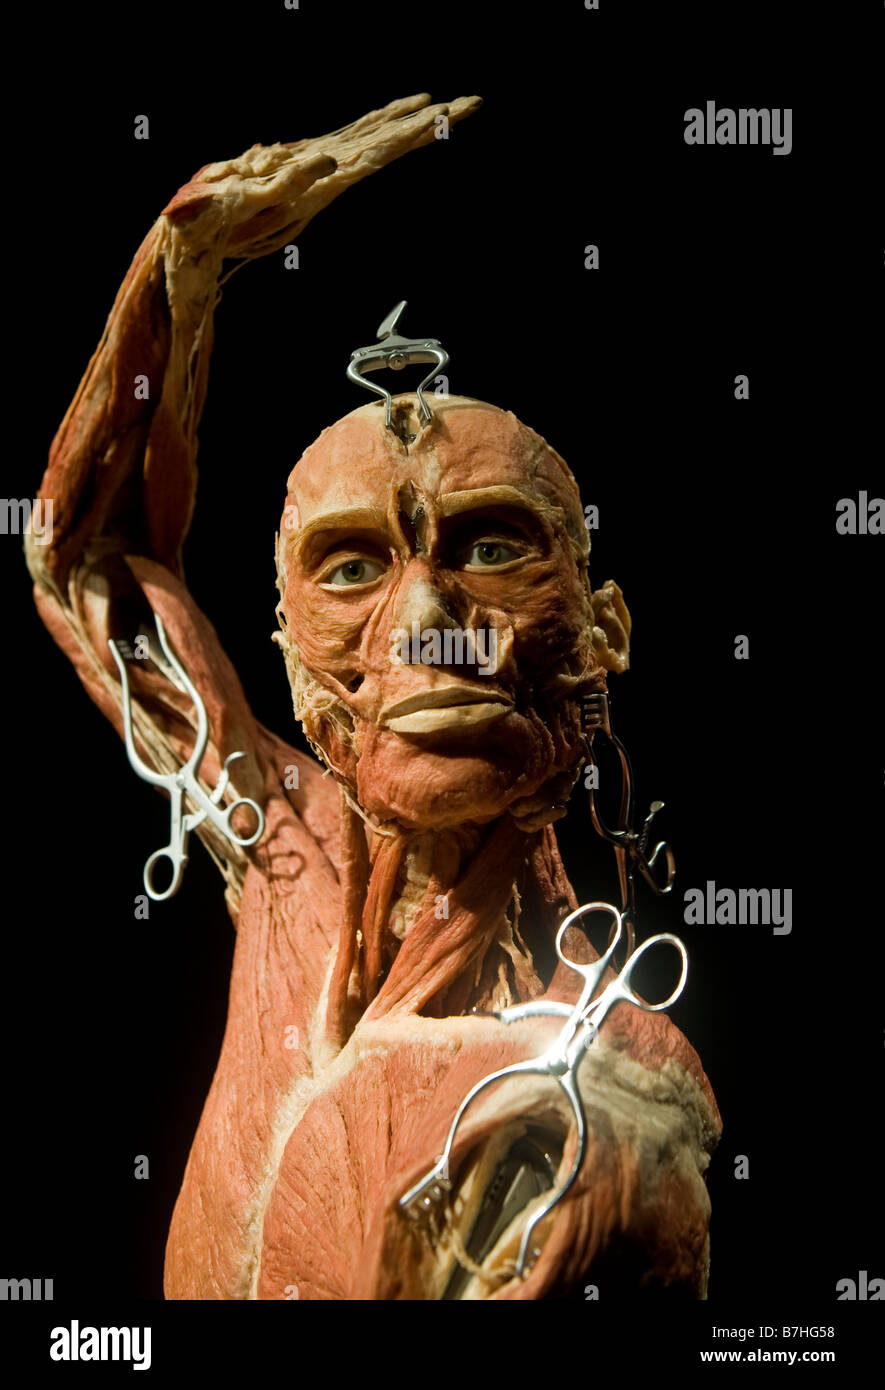 Scientist's Gunther von Hagens The Body Worlds And The Mirror Of Time exhibition at the O2 Arena in Greenwich, London Stock Photo